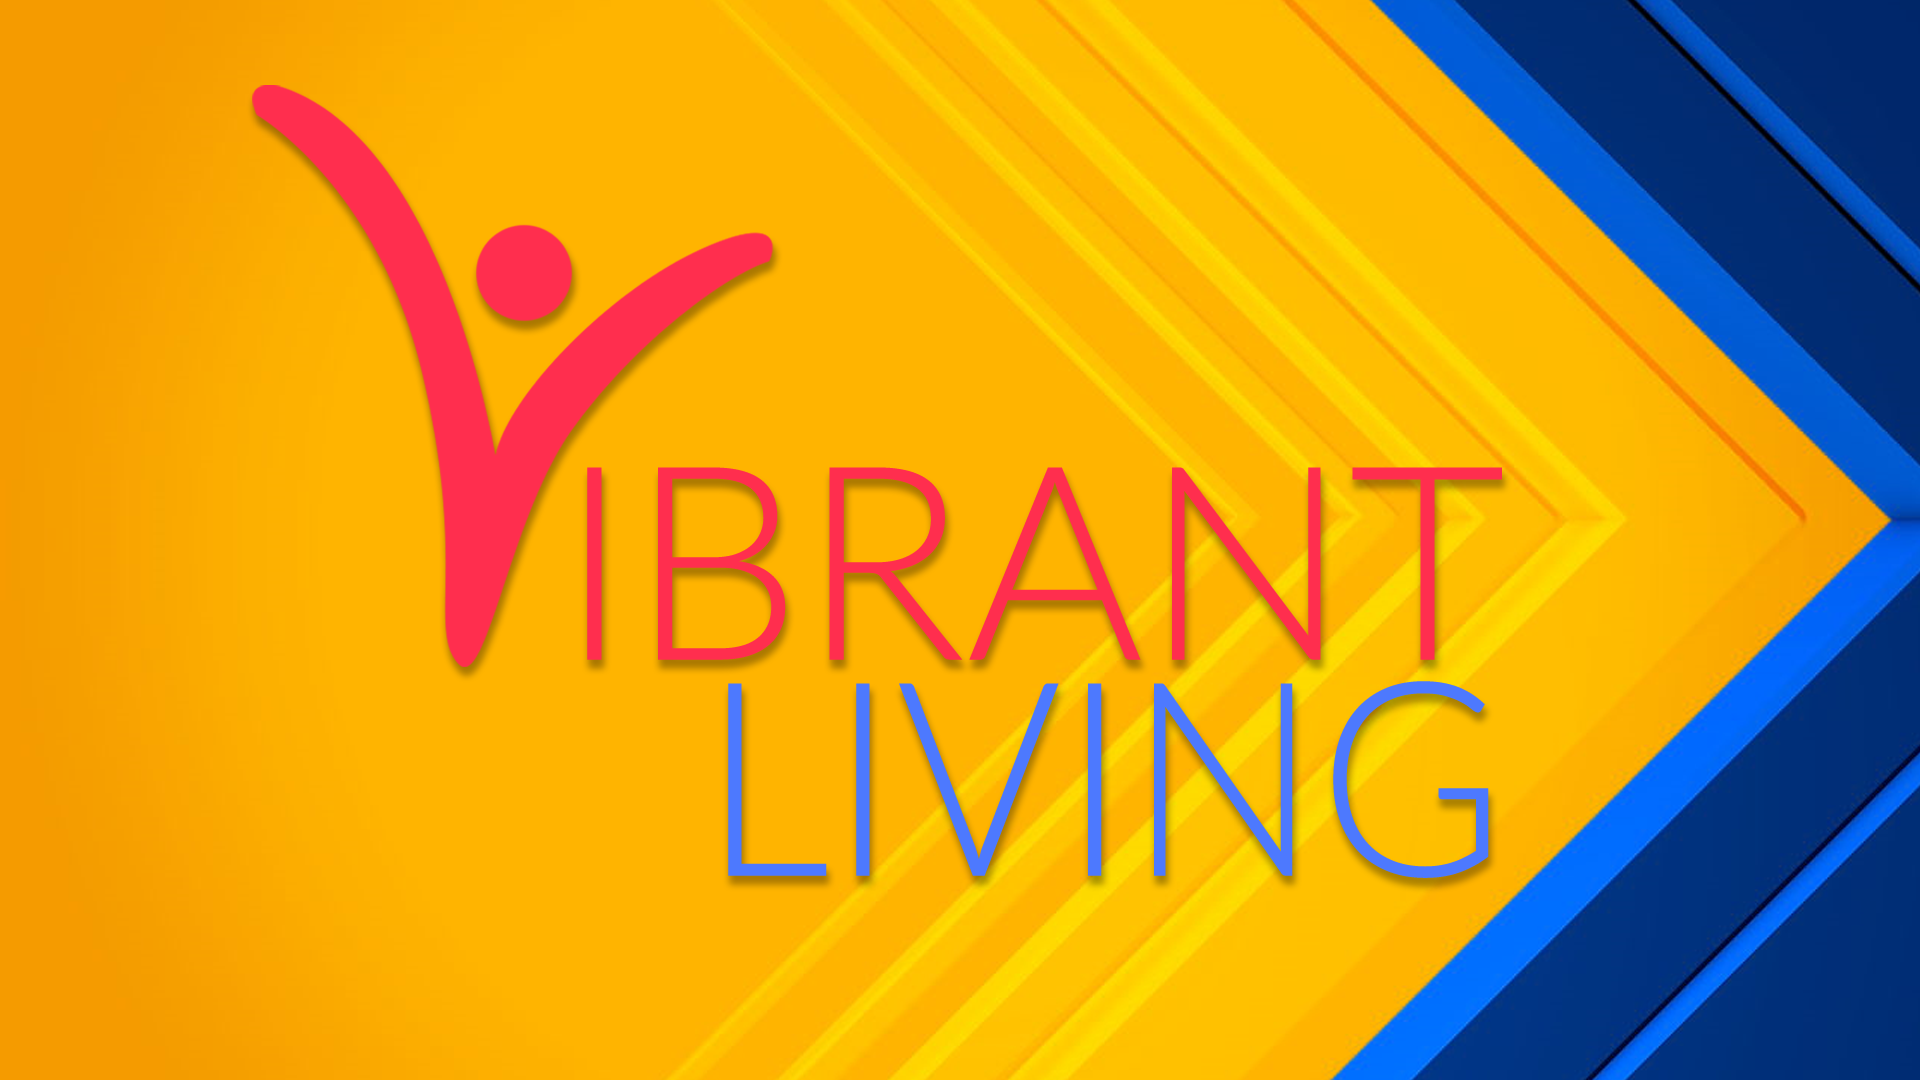 Link to Vibrant Living